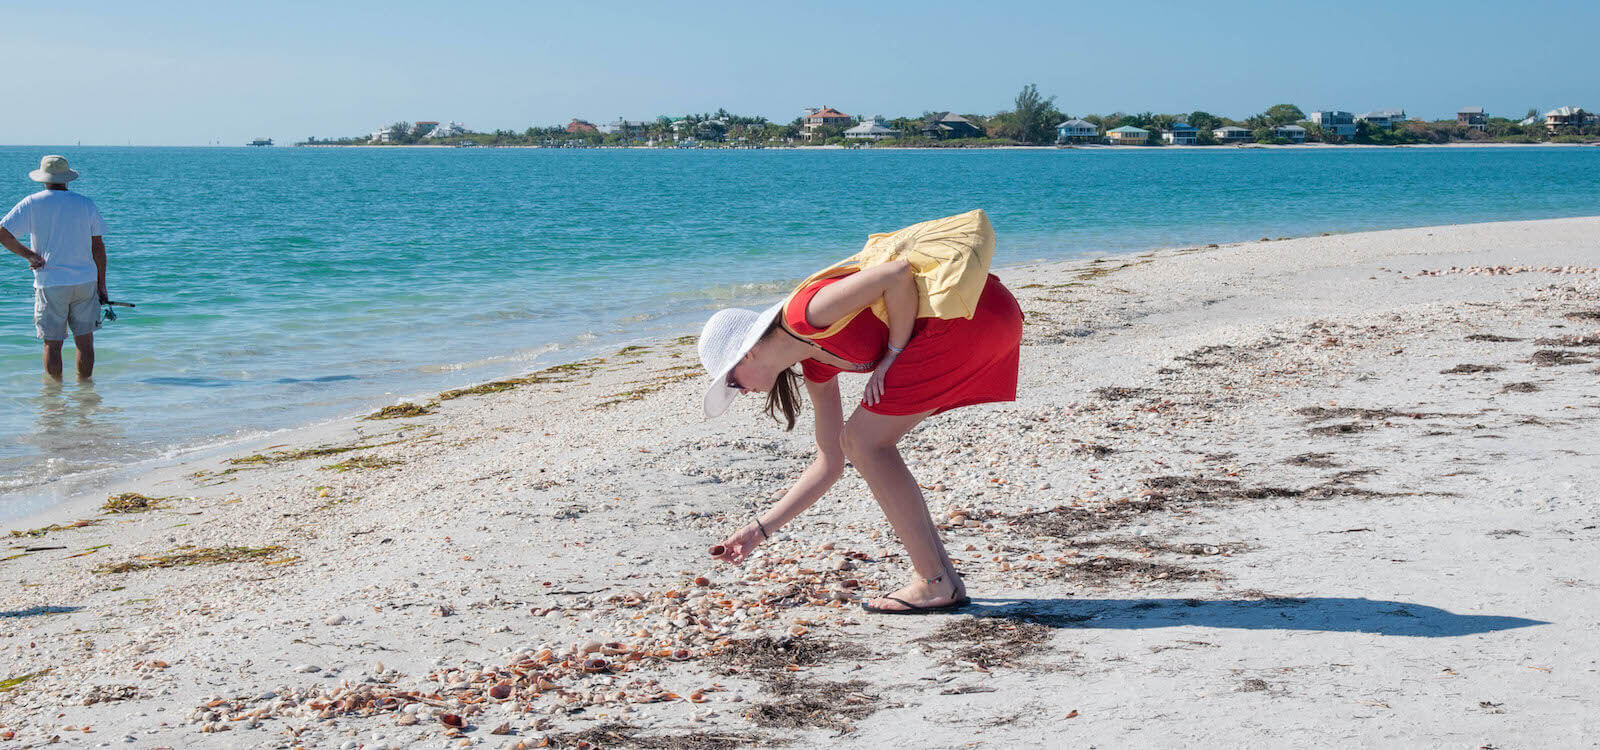 Woman bent over picking up a shell, shelling at Cayo Costa beach Fort Myers, Florida. USA. Photo by Debi Pittman Wilkey